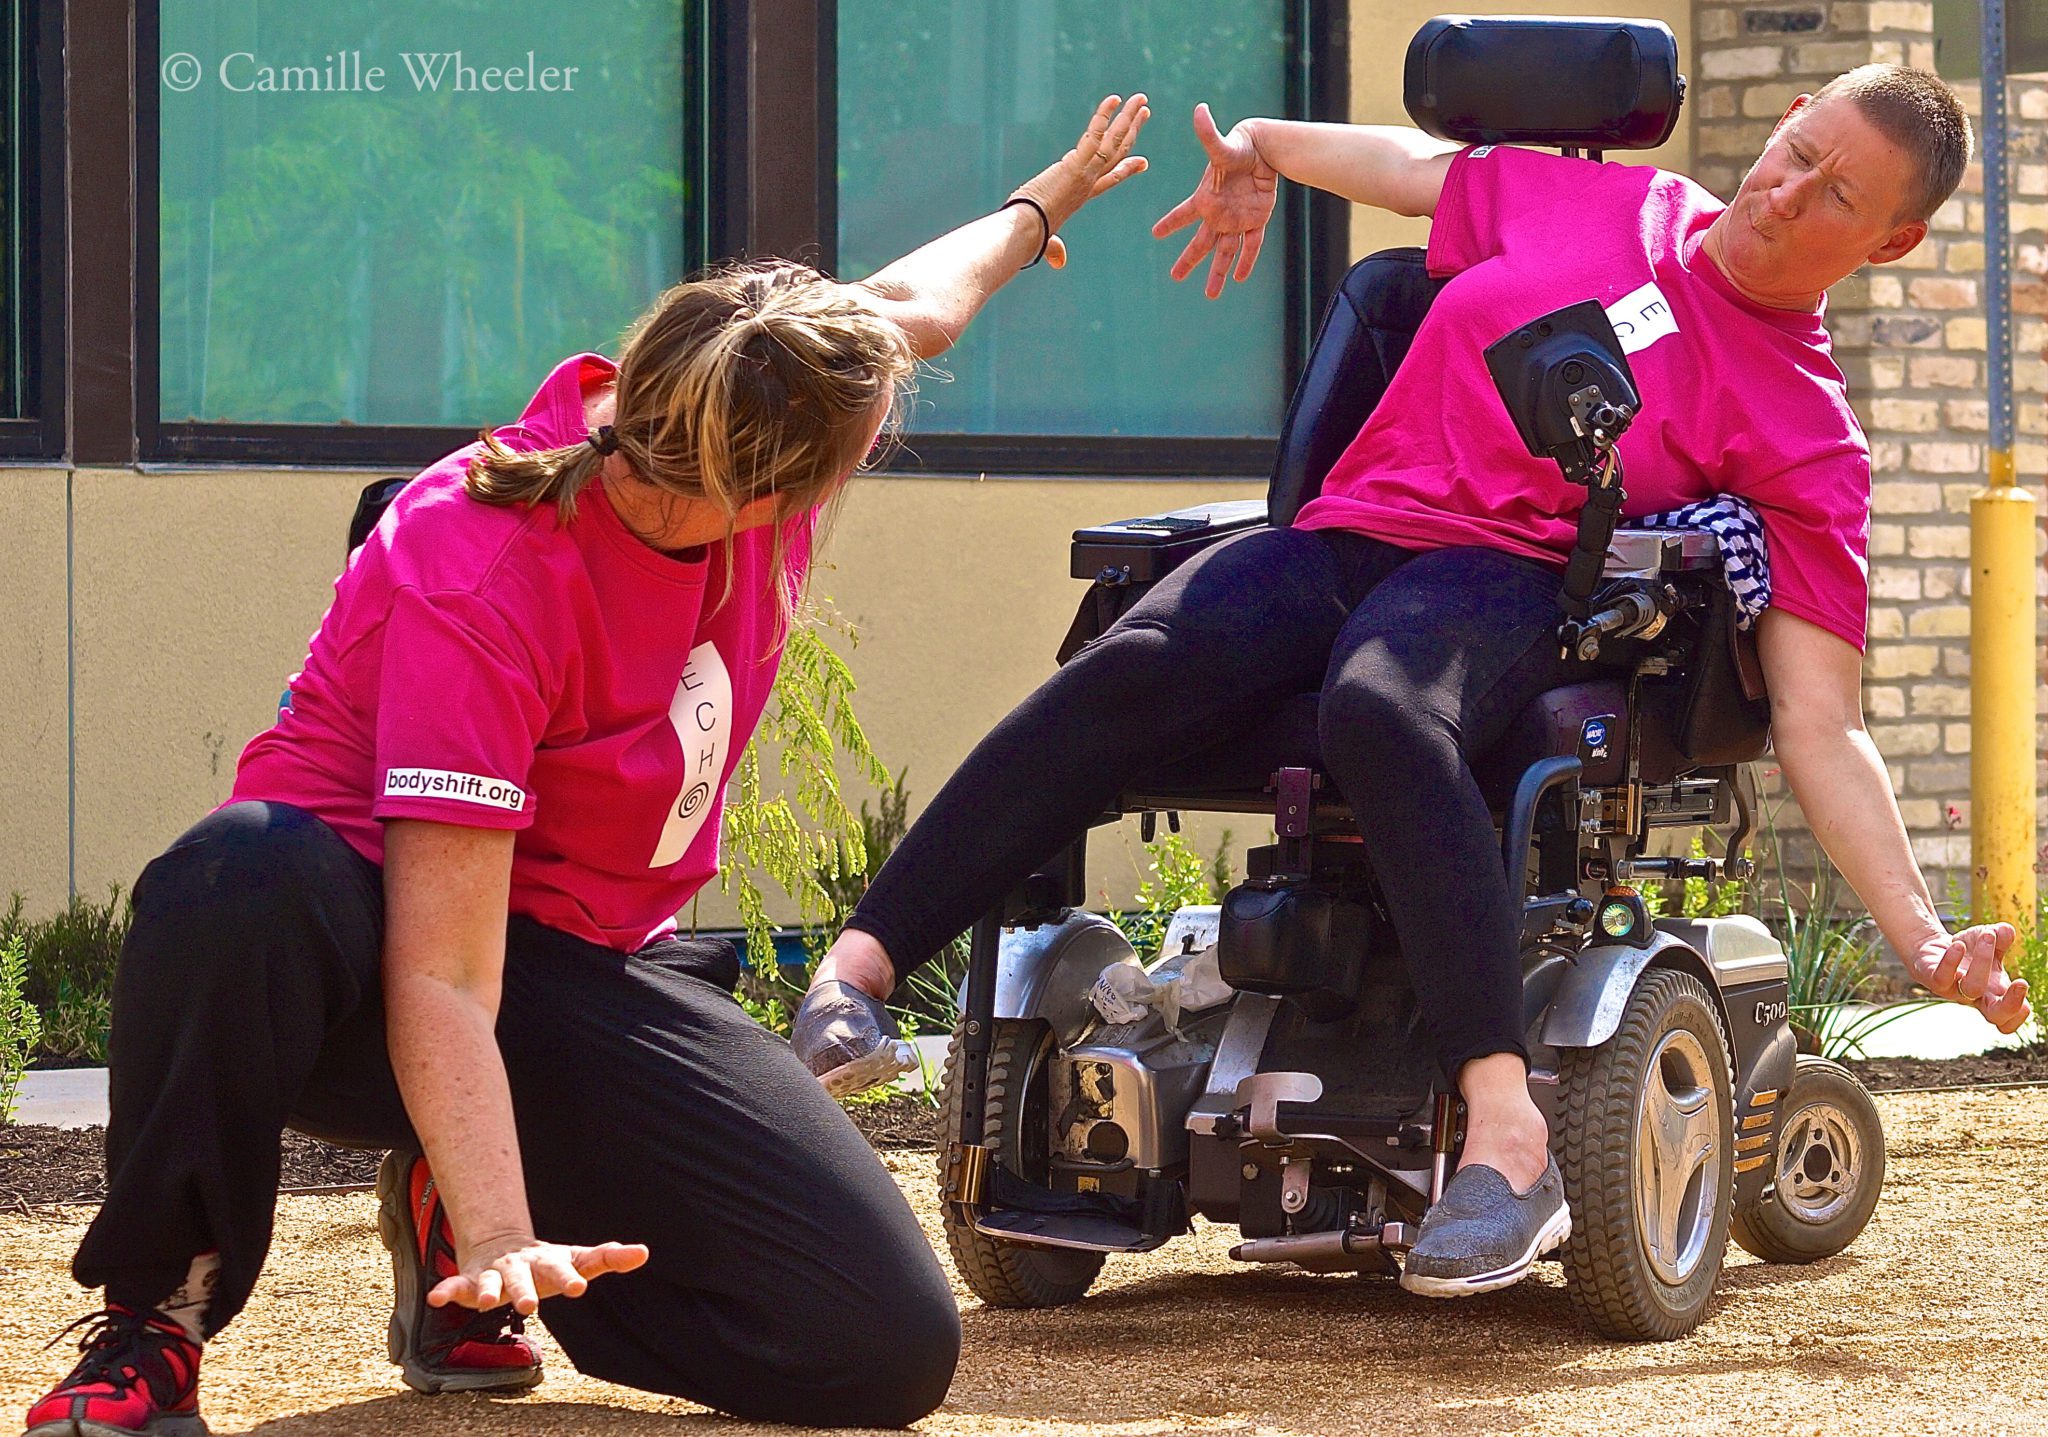 Two dancers with and without disabilities performing outdoors.